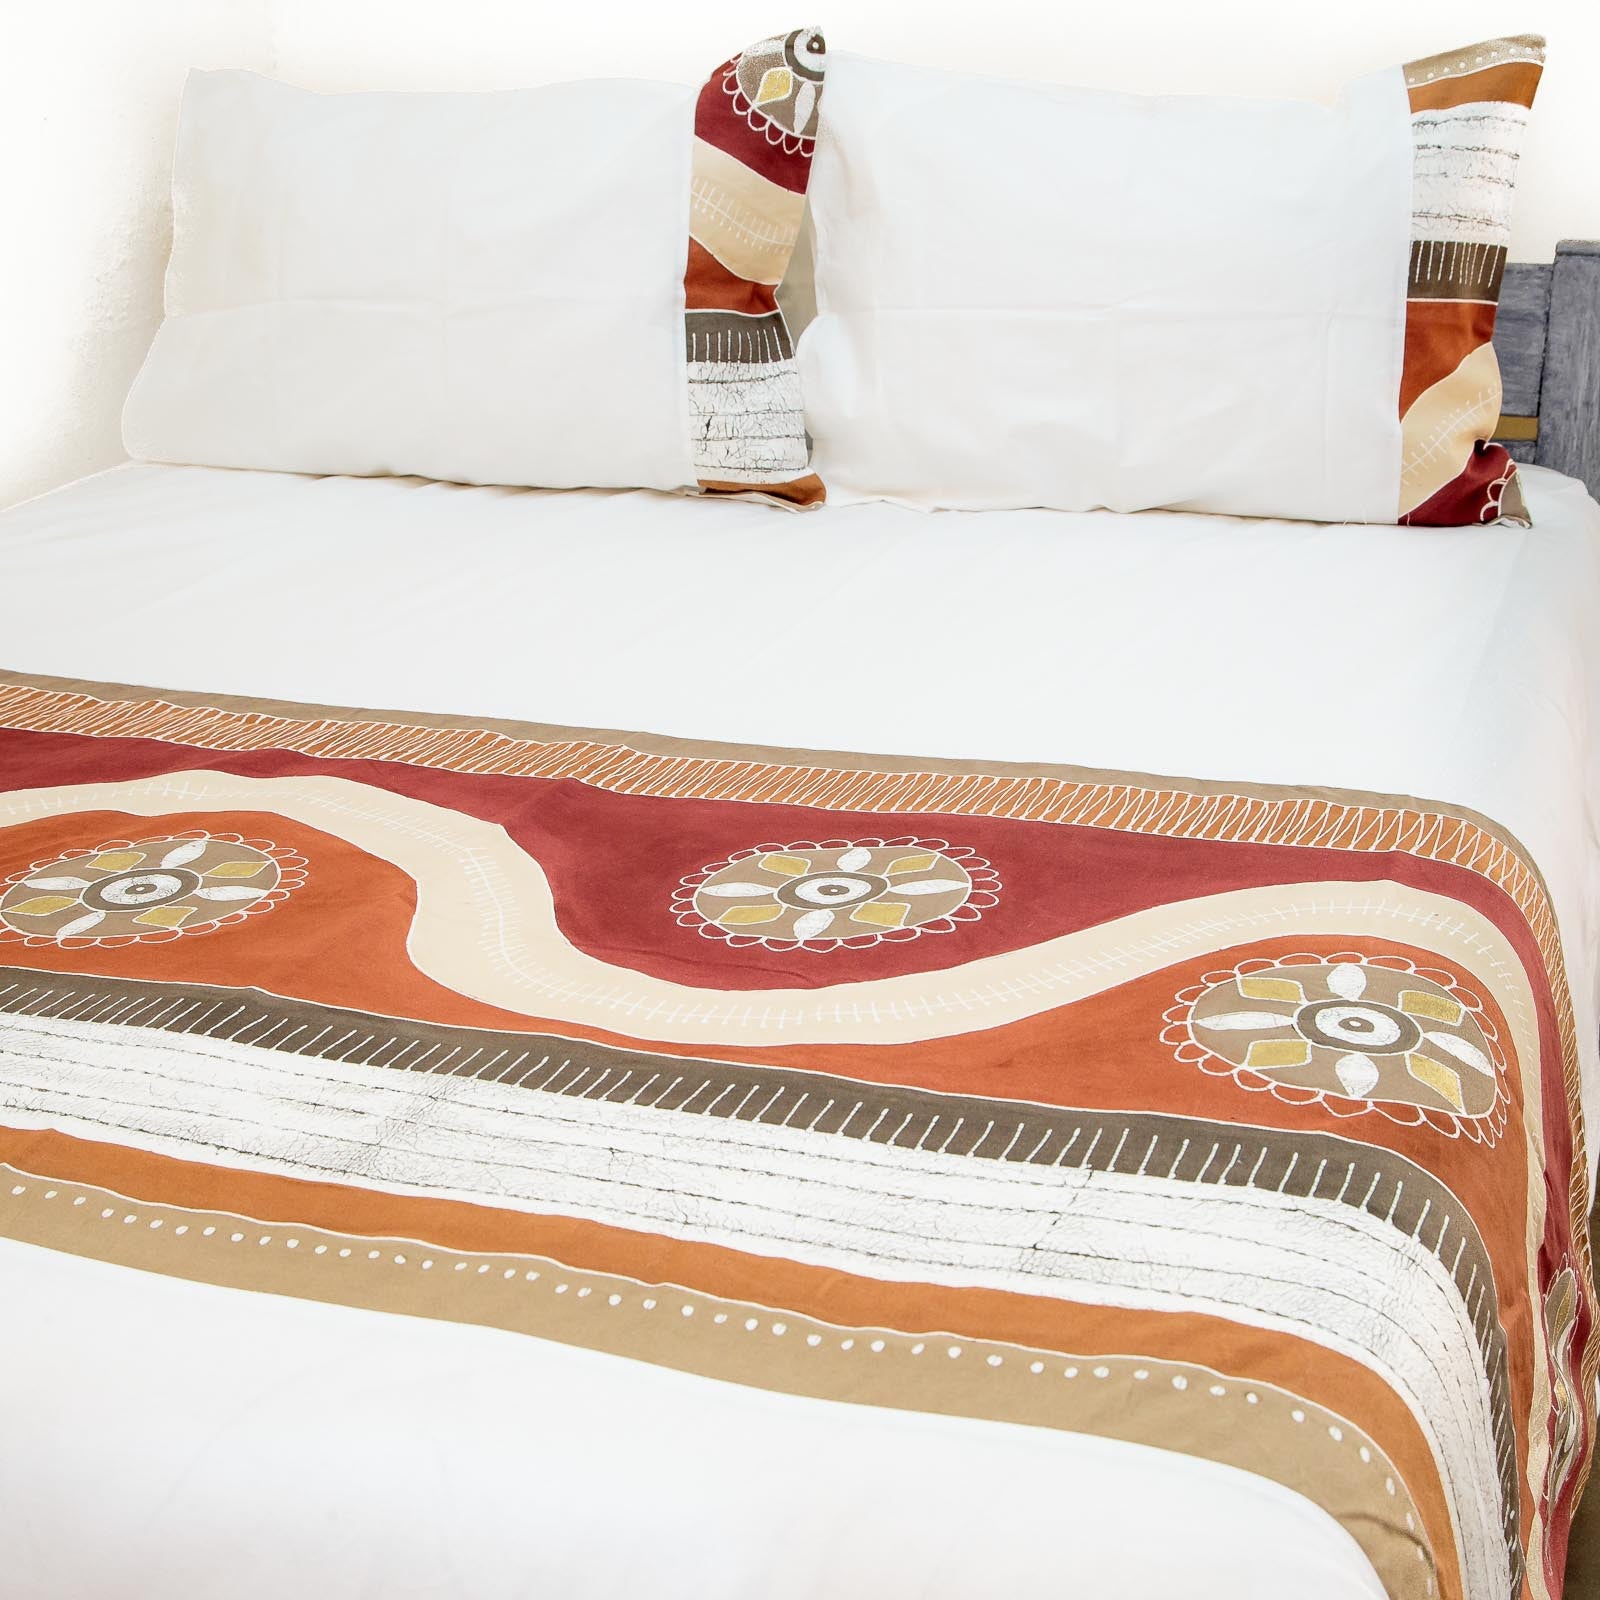 Hand-painted african print duvet cover